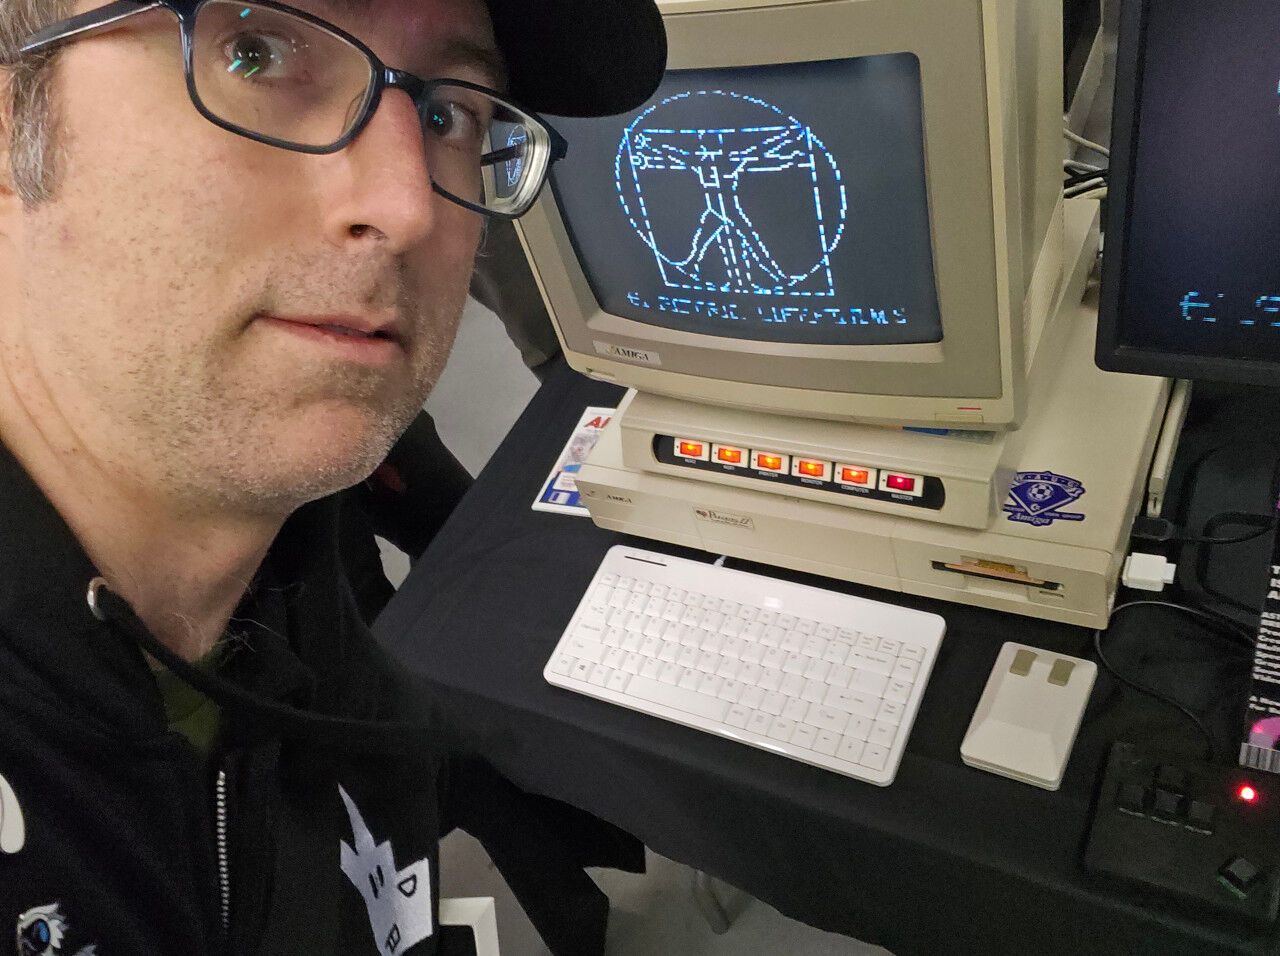 A middle aged man standing in front of an Amiga 1000. A demoscene demo titled Electric Lifeforms is playing on the screen.